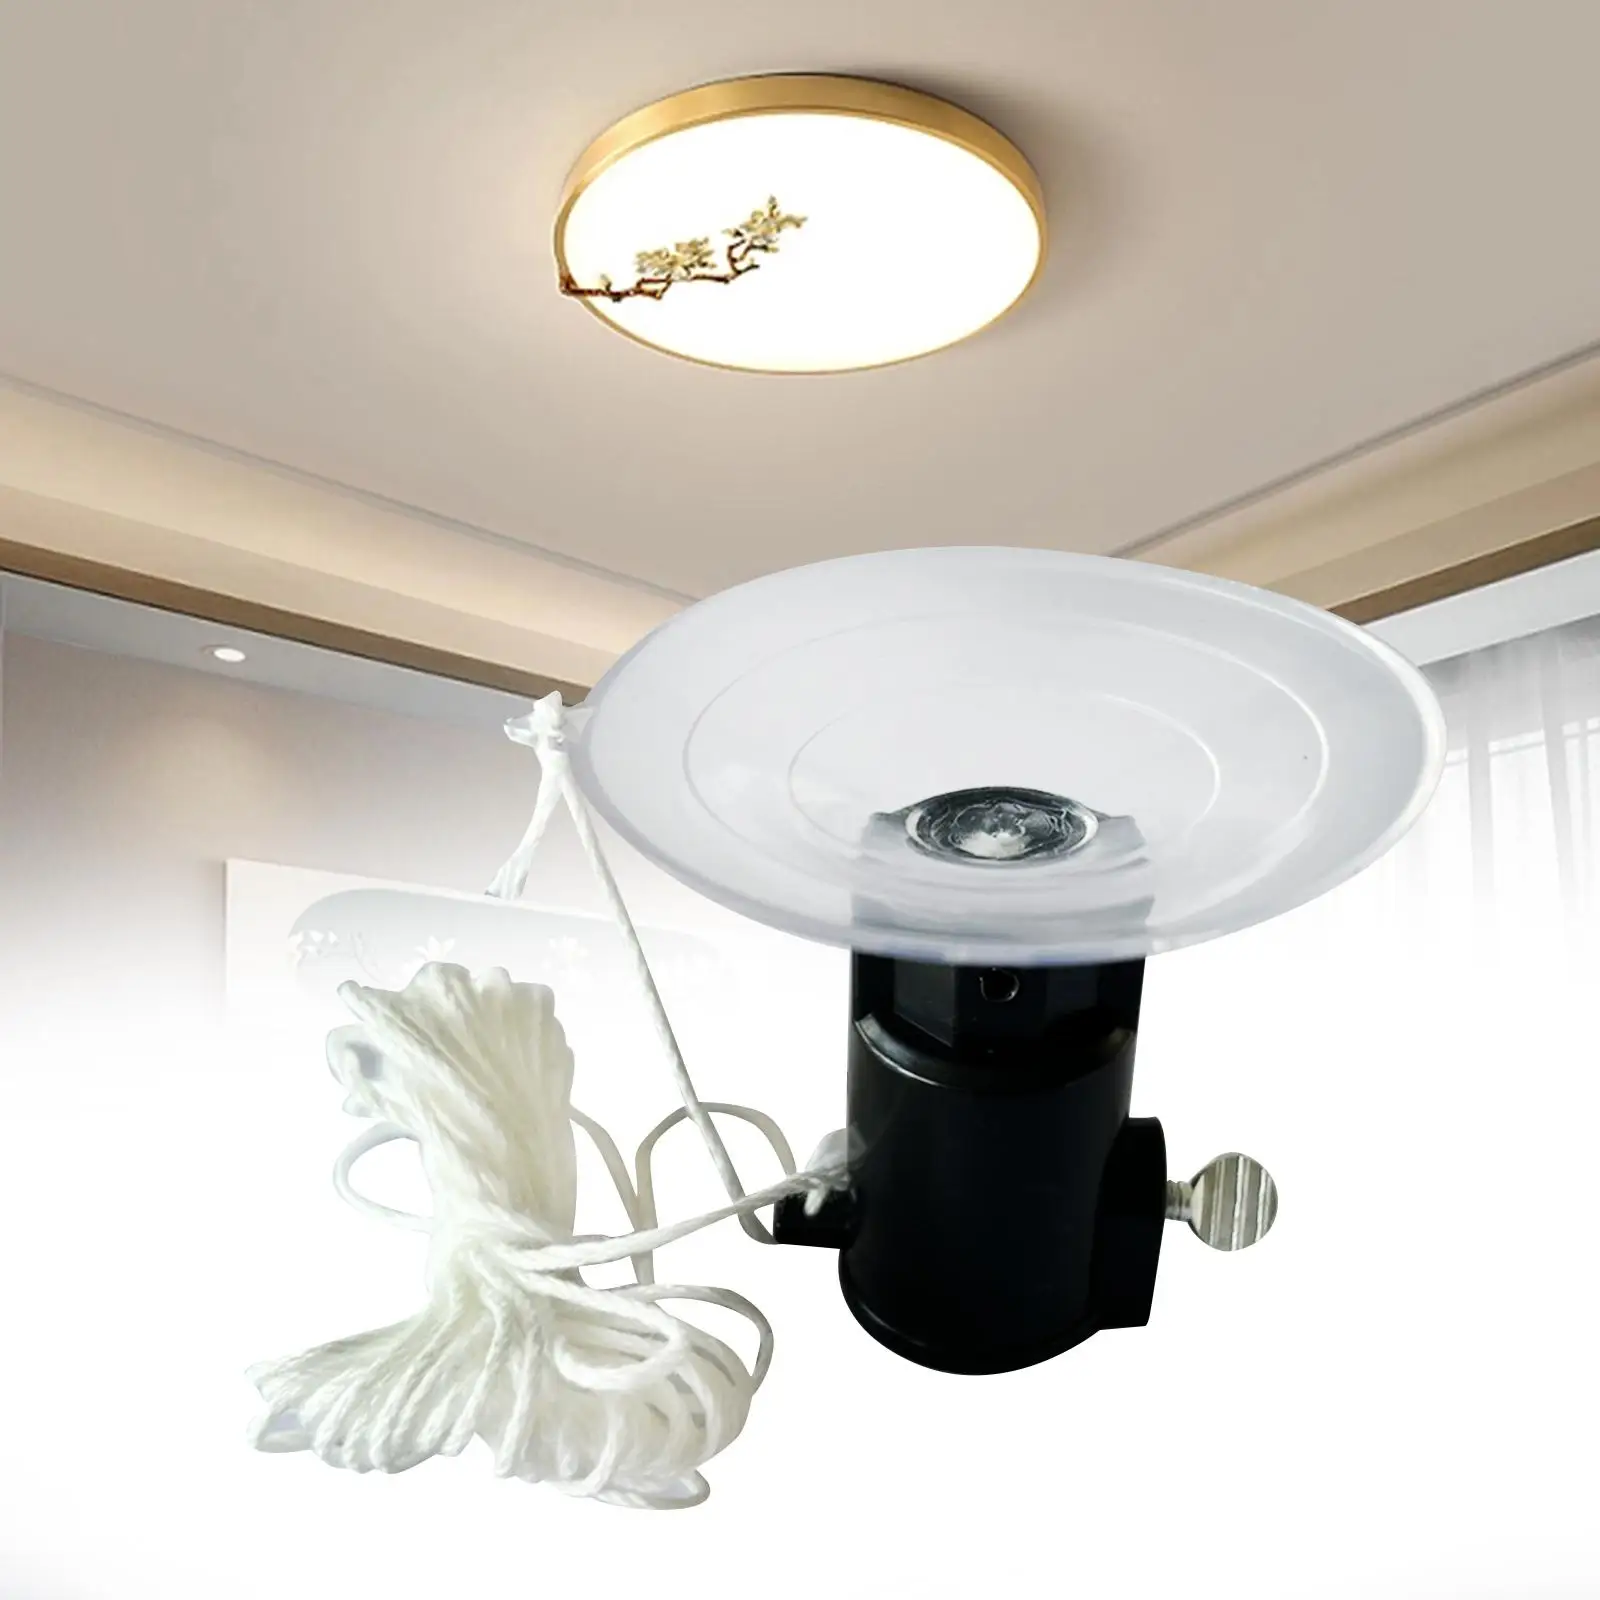 High Ceiling Light Bulb Changer Light Lamp Replacing Tools Suction Cup Light Bulb Changer for Outdoor Bedroom Recessed Lights